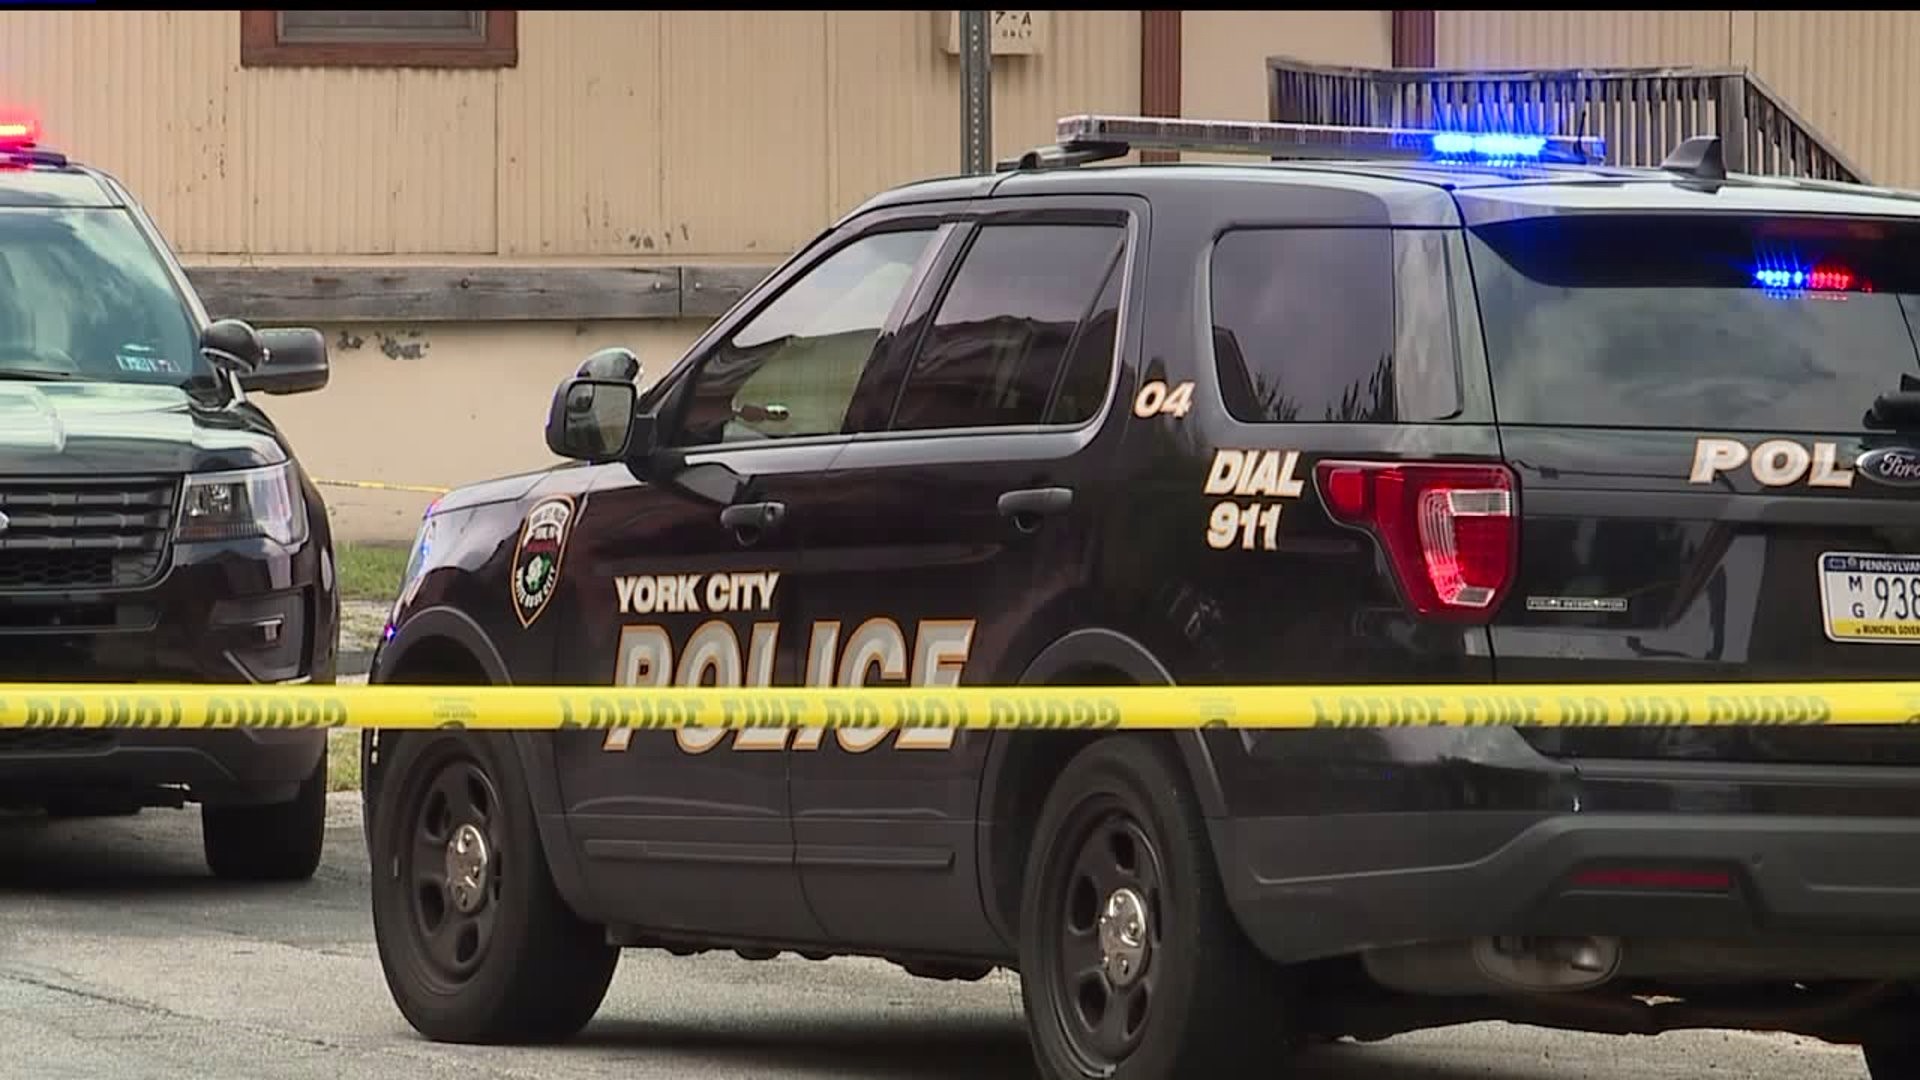 Man arrested in connection to police-involved shooting in York